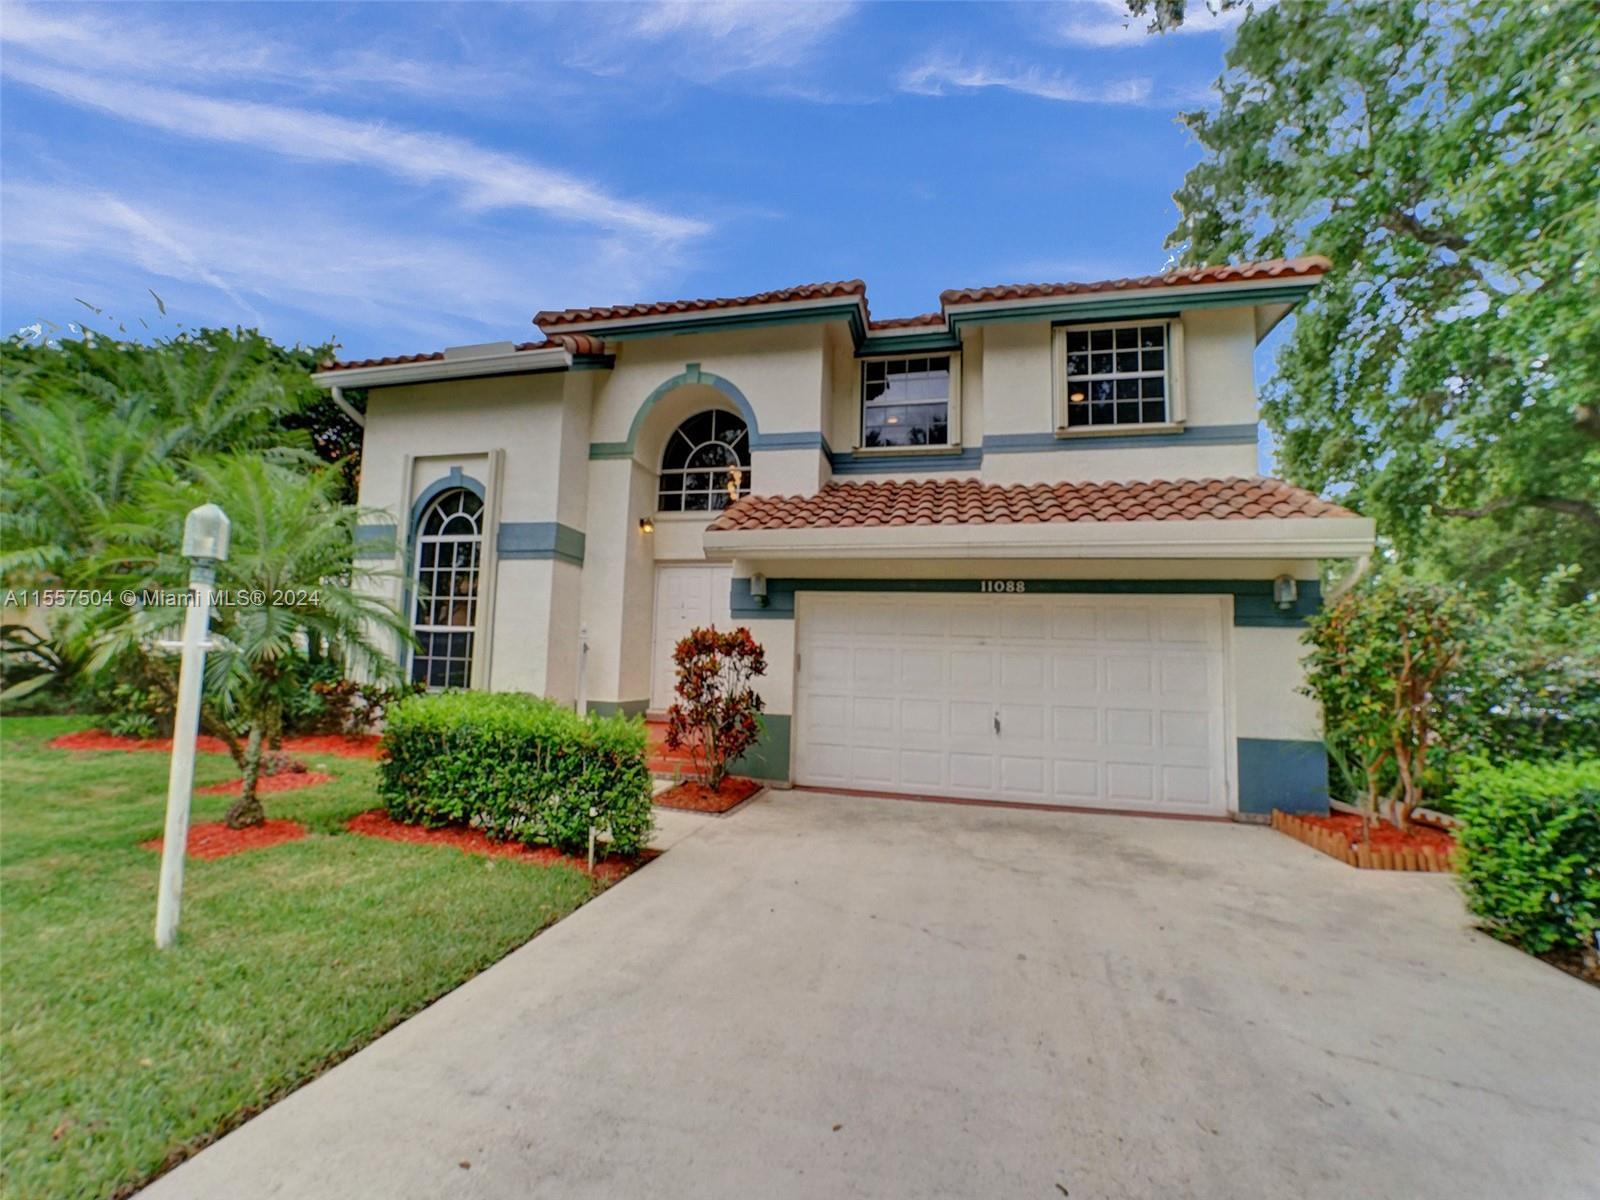 Photo of 11088 Helena Dr in Cooper City, FL